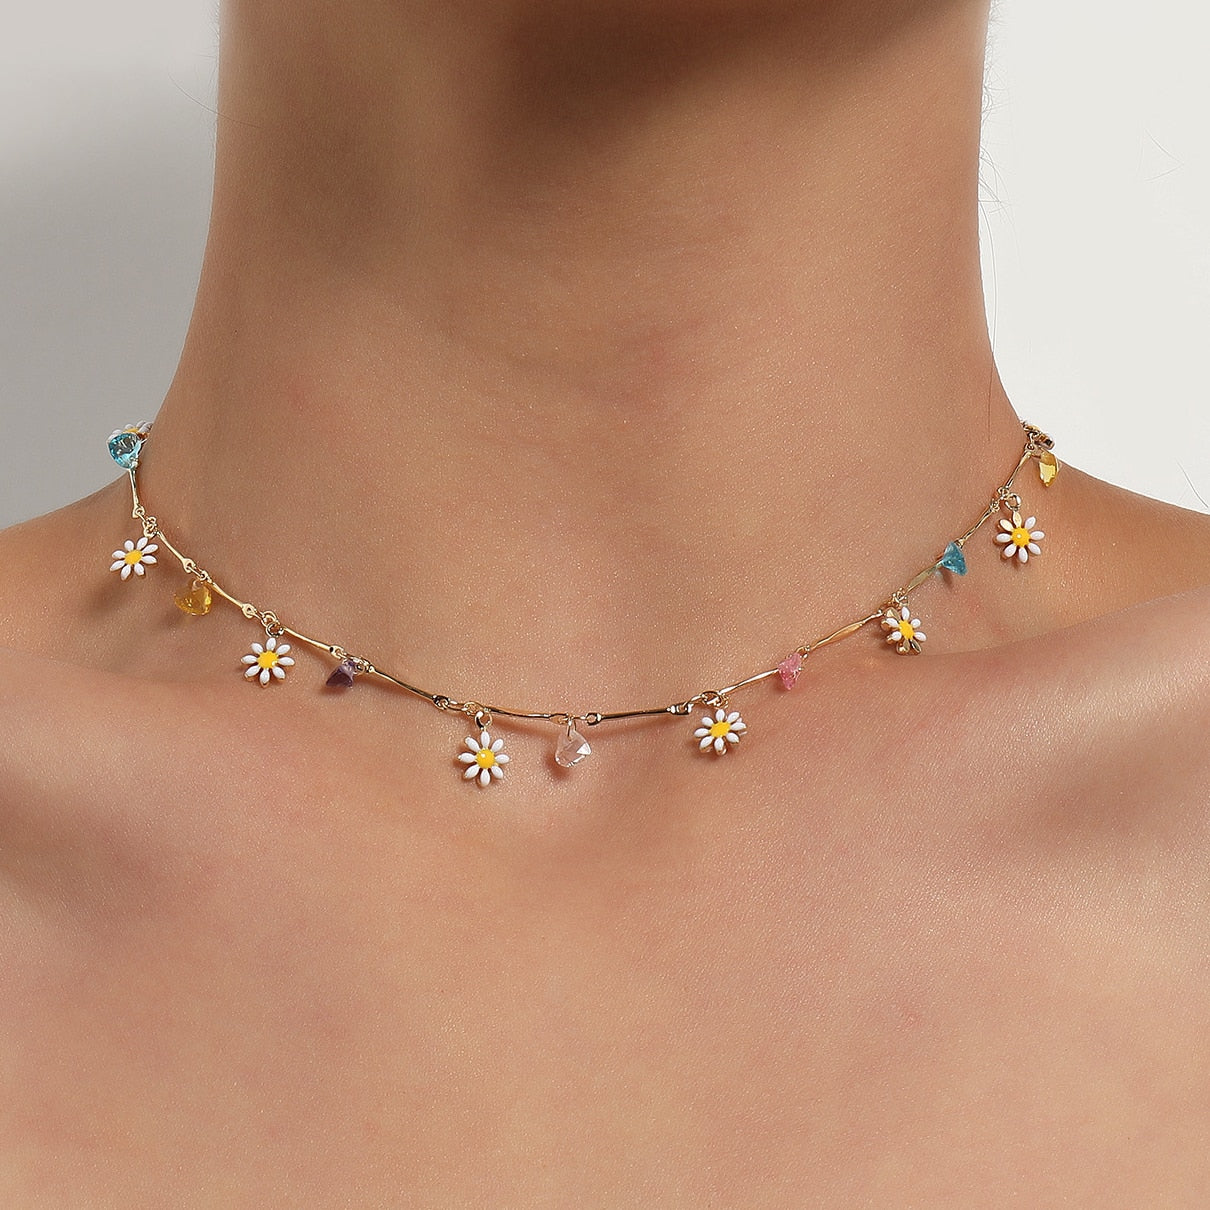 New Korea Lovely Daisy Flowers Colorful Beaded Charm Statement Short Choker Necklace for Women Vacation Jewelry